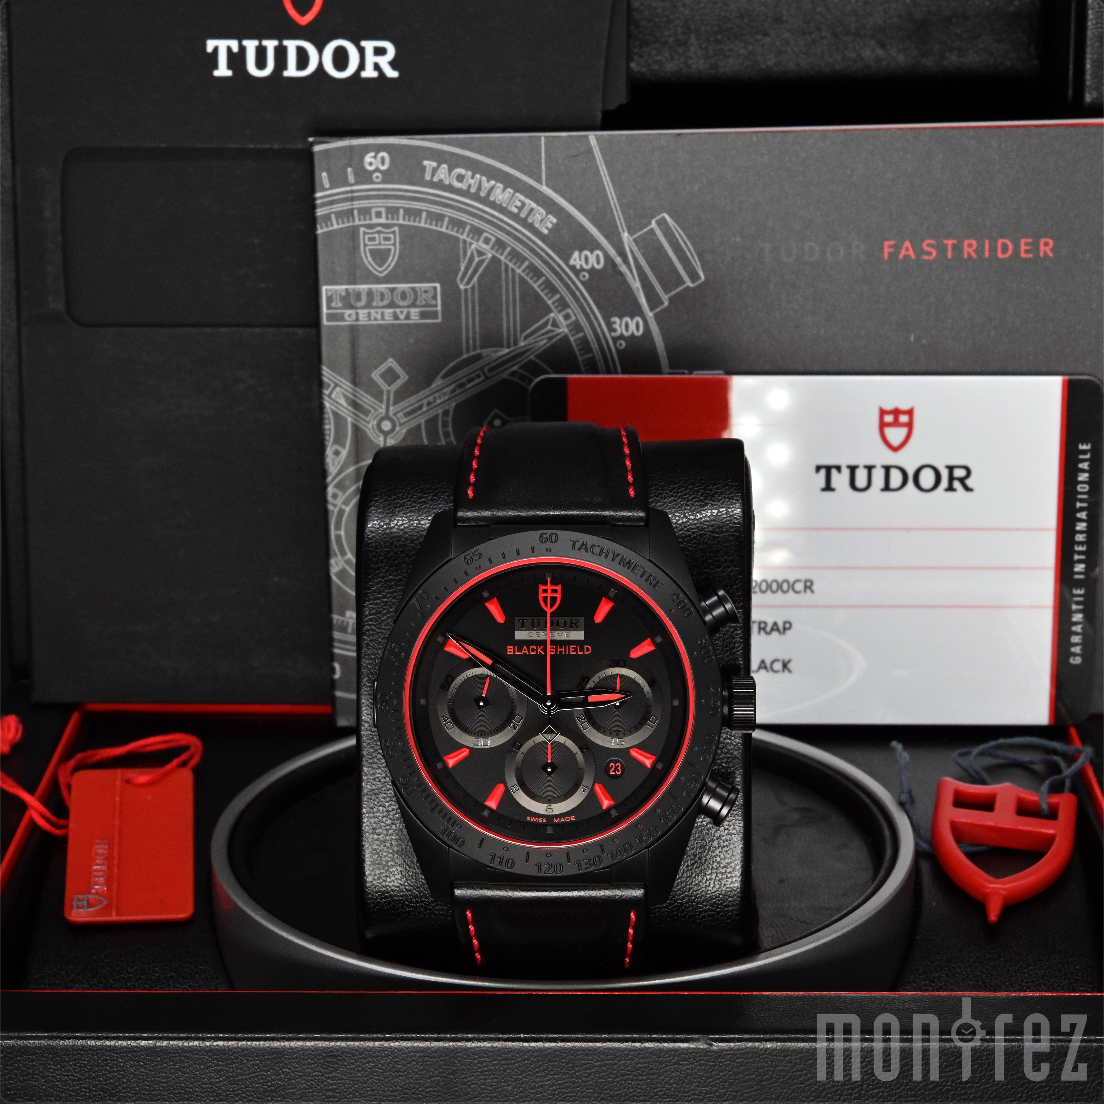 [Pre-Owned Watch] Tudor Fastrider Black Shield 42mm 42000CR (Leather Strap) (Out of Production)